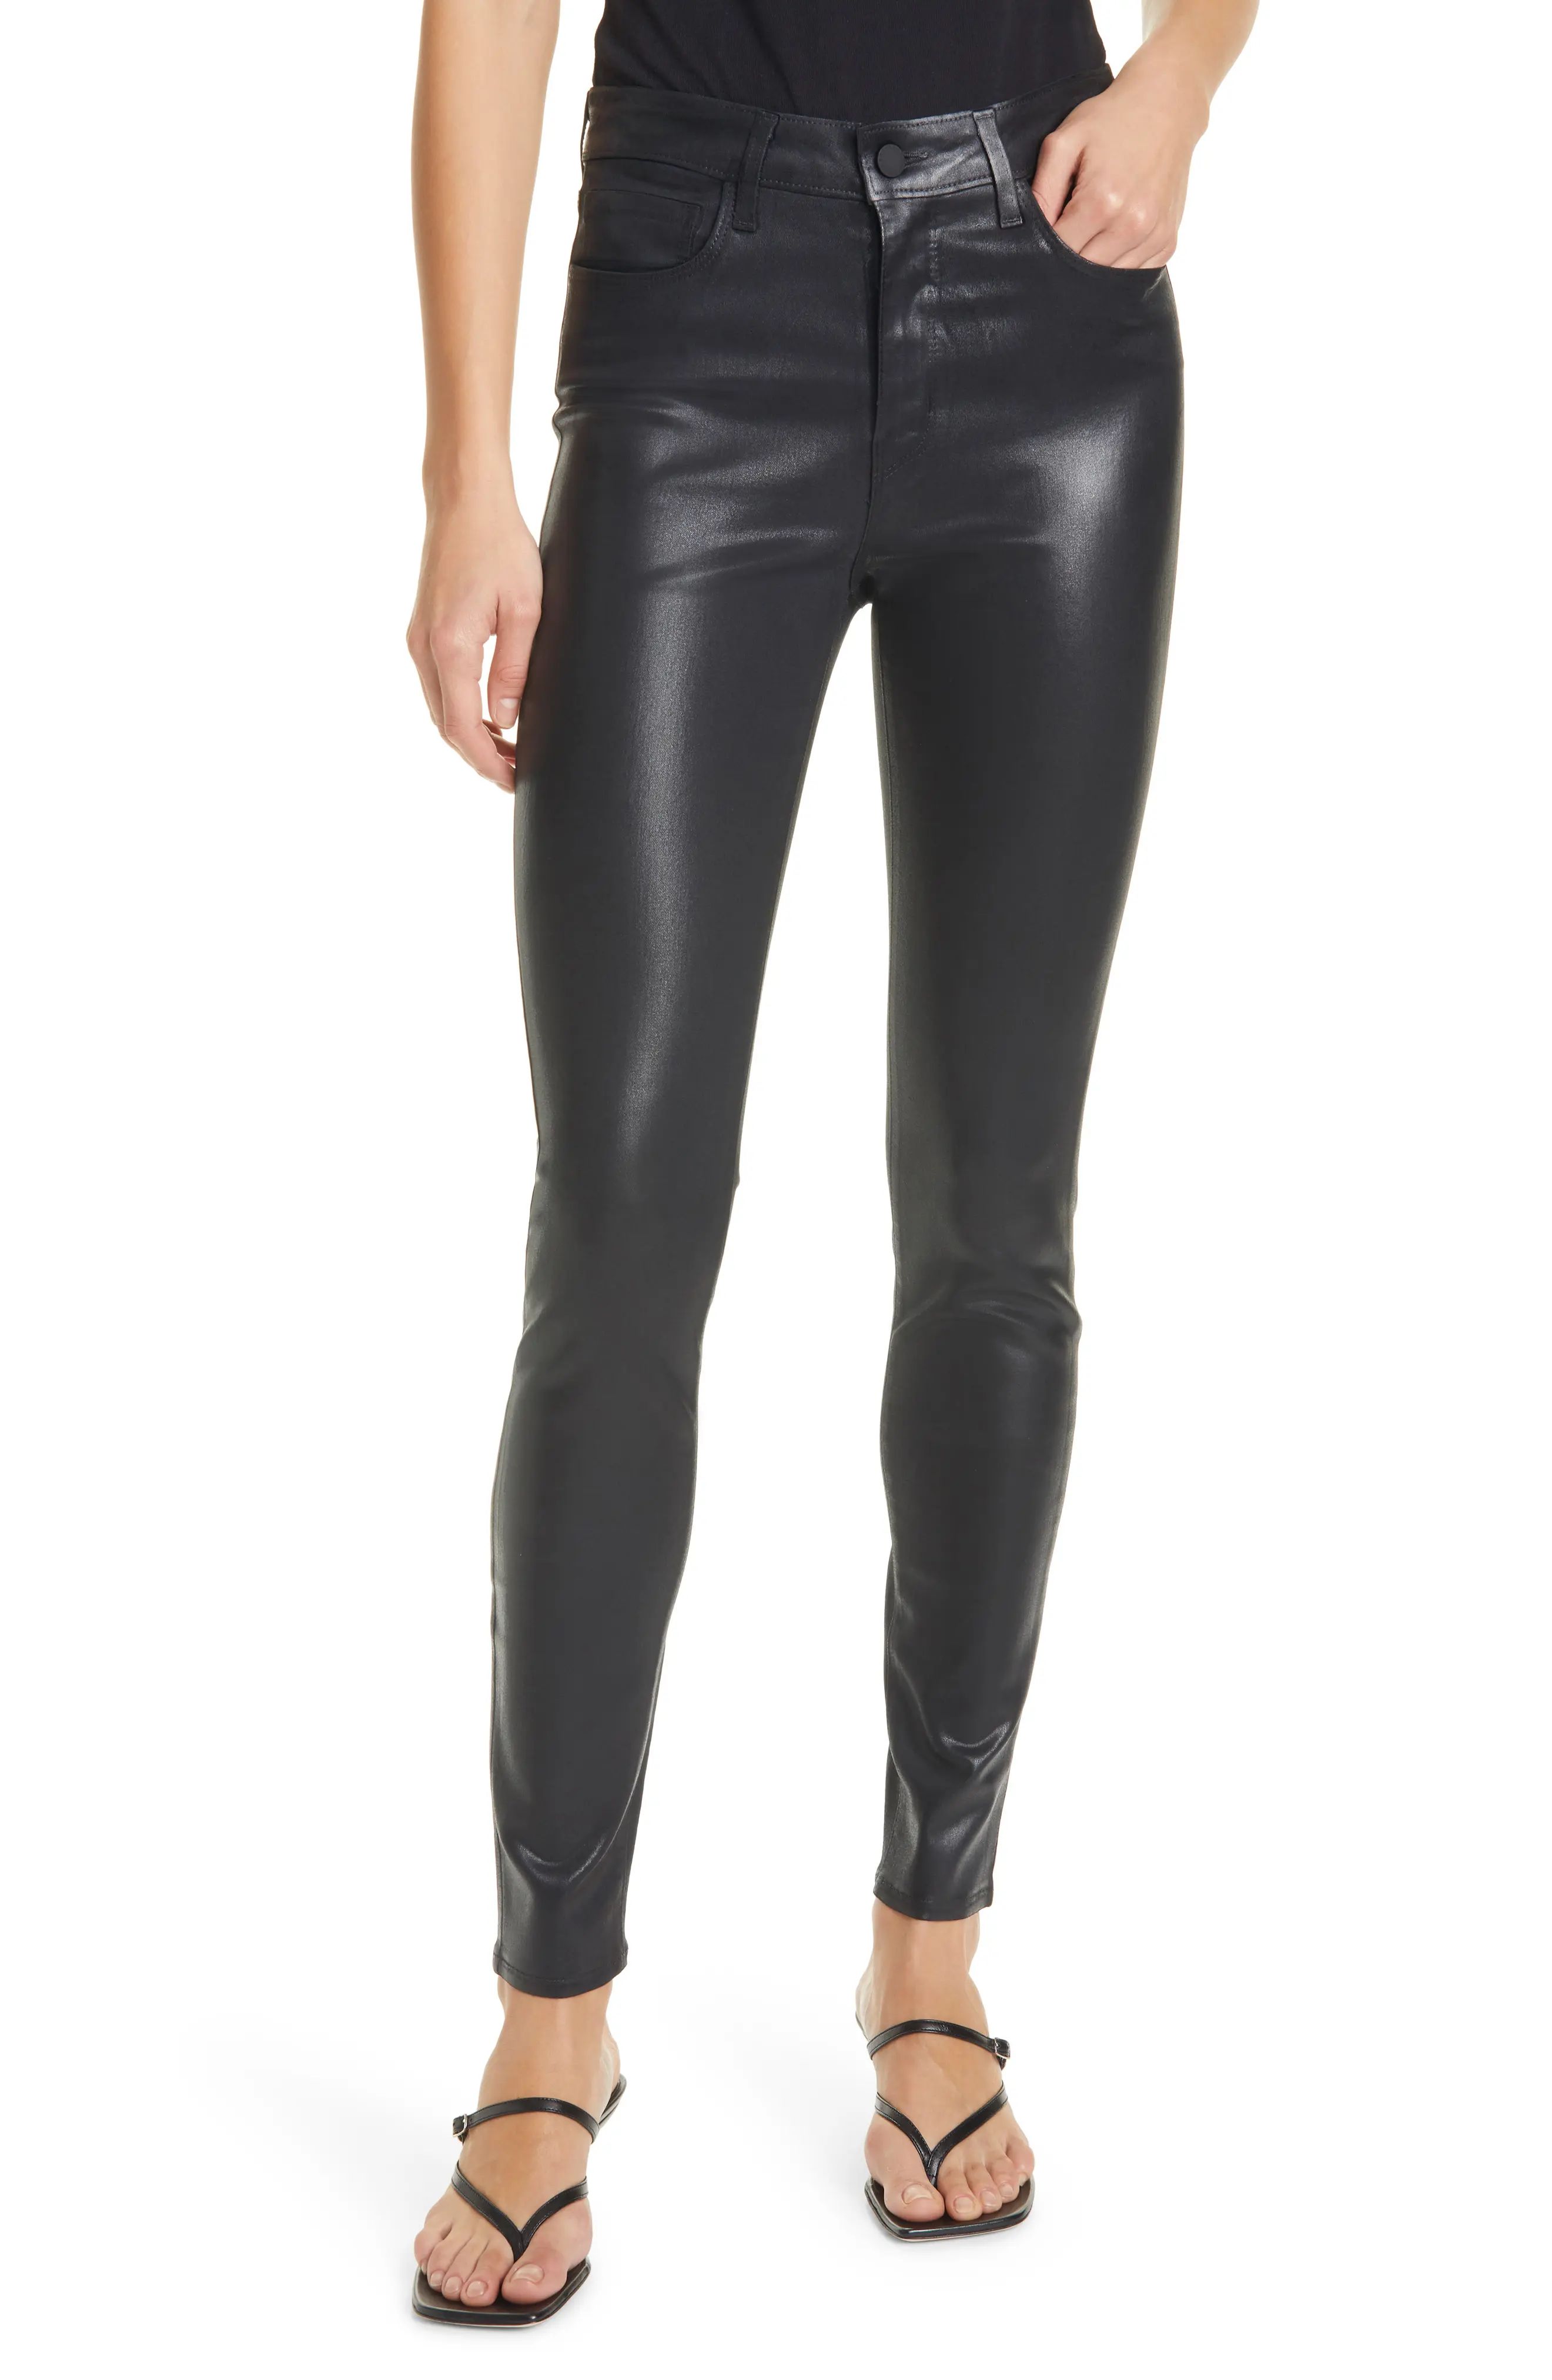 L'AGENCE Marguerite Coated High Waist Skinny Jeans, Size 23 in Black Coated at Nordstrom | Nordstrom